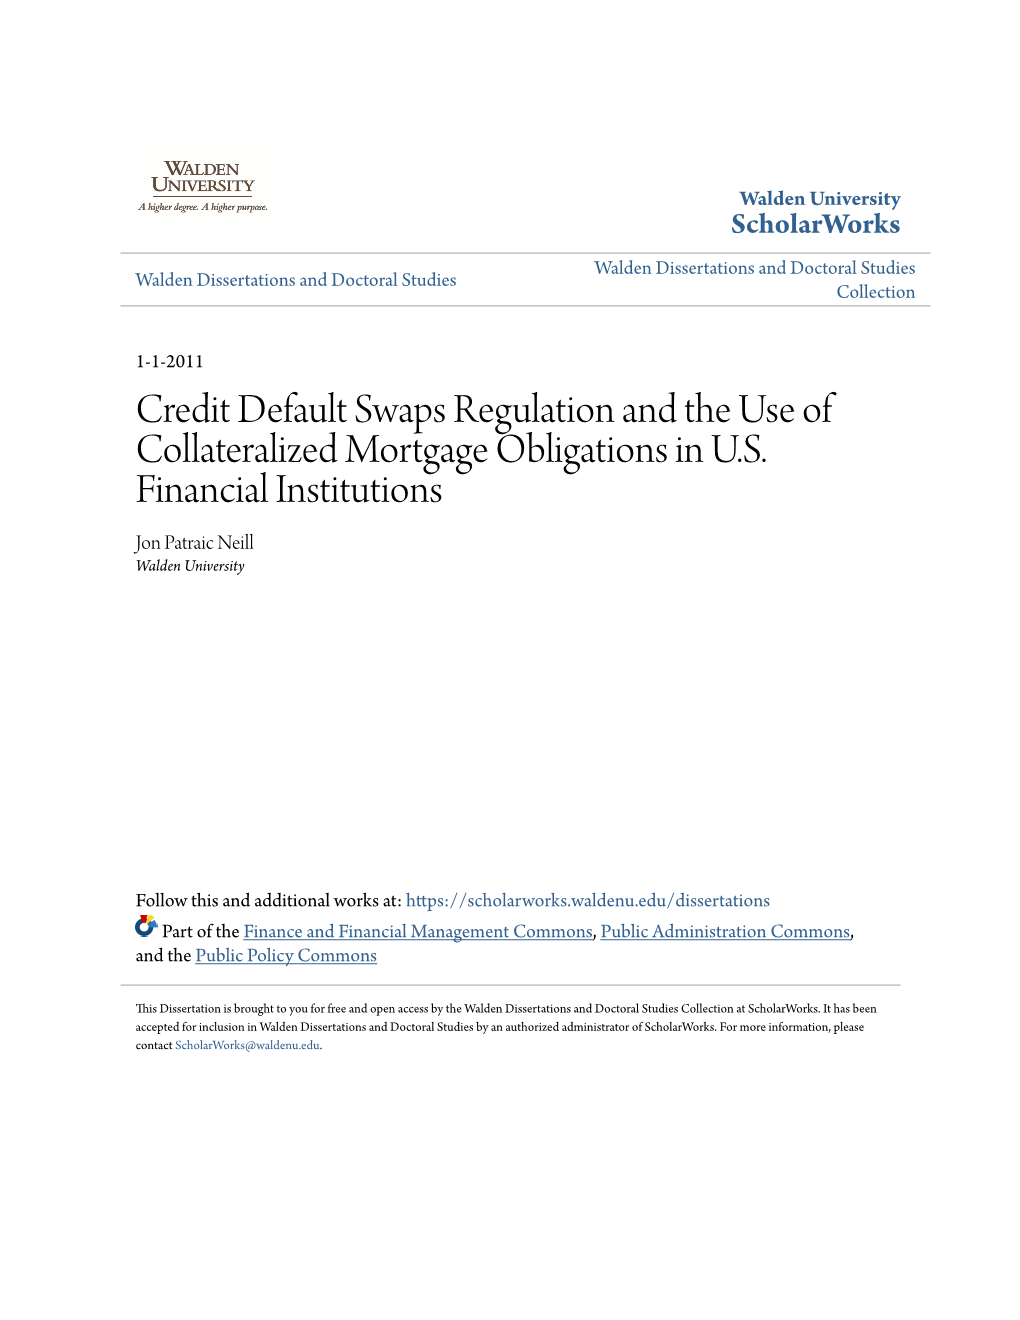 Credit Default Swaps Regulation and the Use of Collateralized Mortgage Obligations in U.S